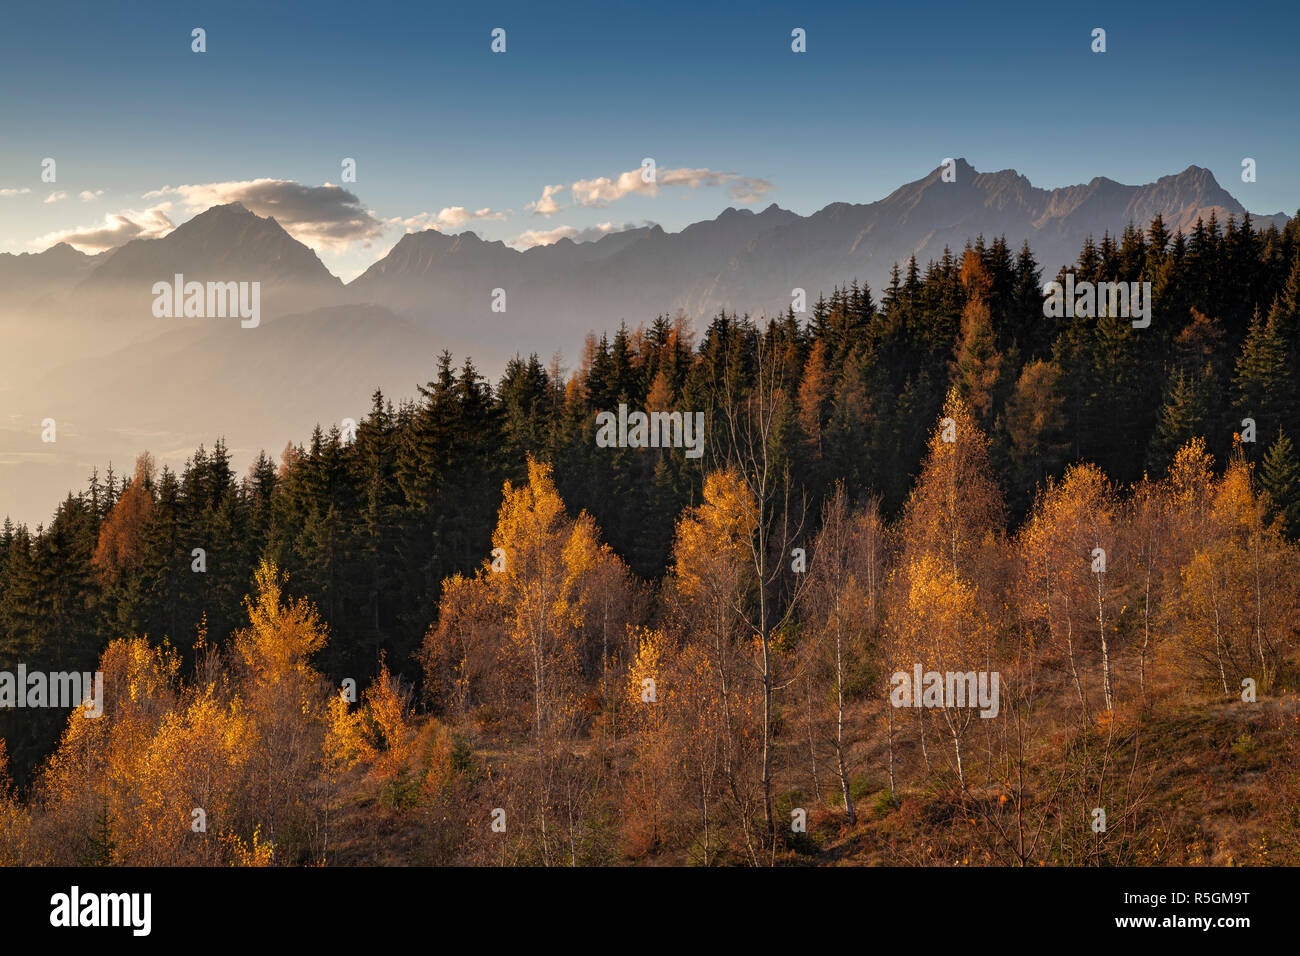 Autumnal mountain landscape with birches, larches and spruces, Karwendel mountains at the back, Pillberg, Pill, Tyrol, Austria Stock Photo